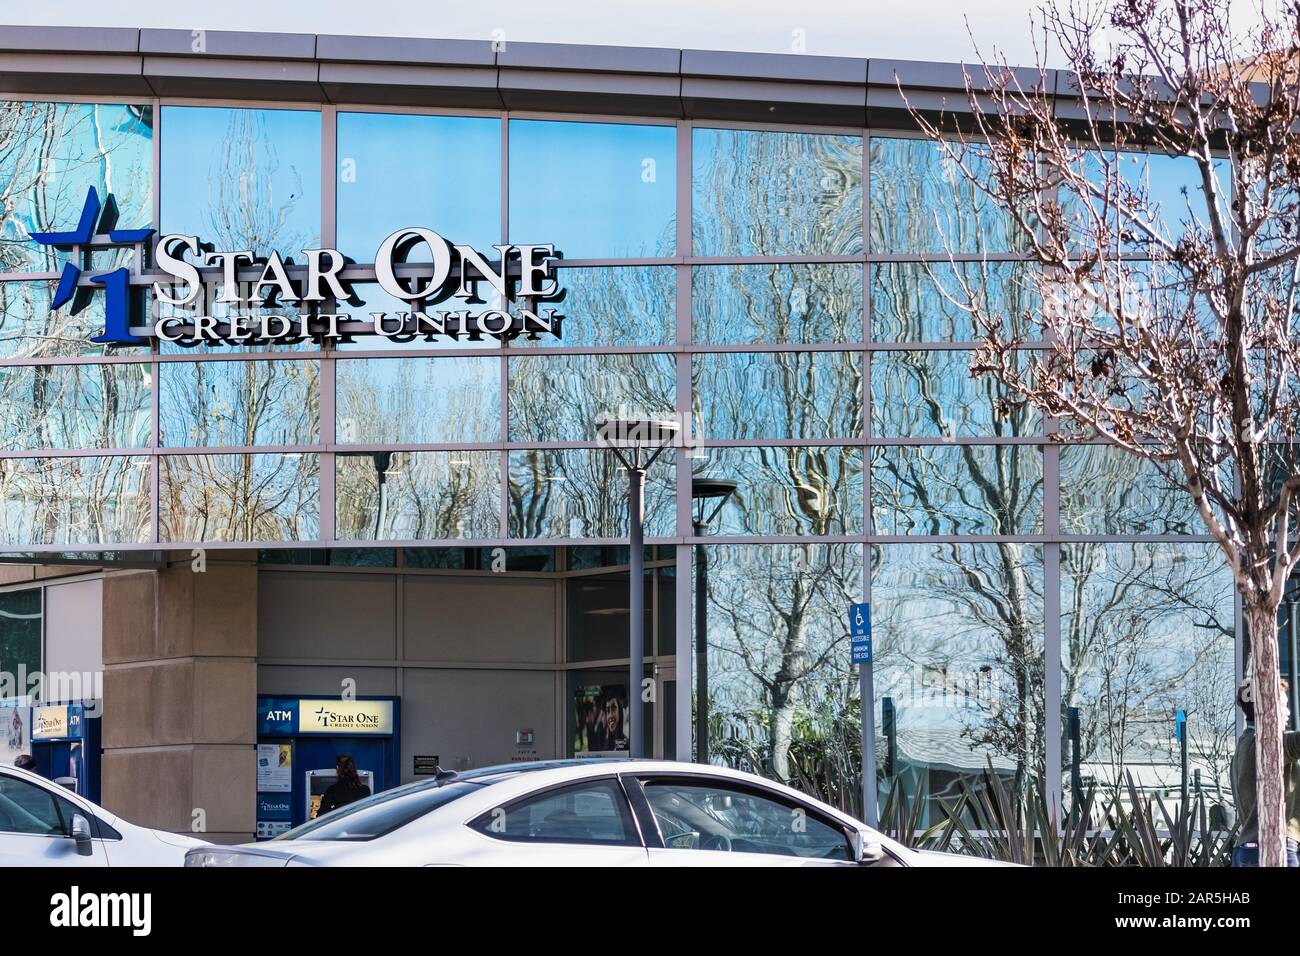 Jan 24, 2020 Sunnyvale / CA / USA - Star One Credit Union branch; Star One Credit Union provides financial services to credit union members in 5 citie Stock Photo